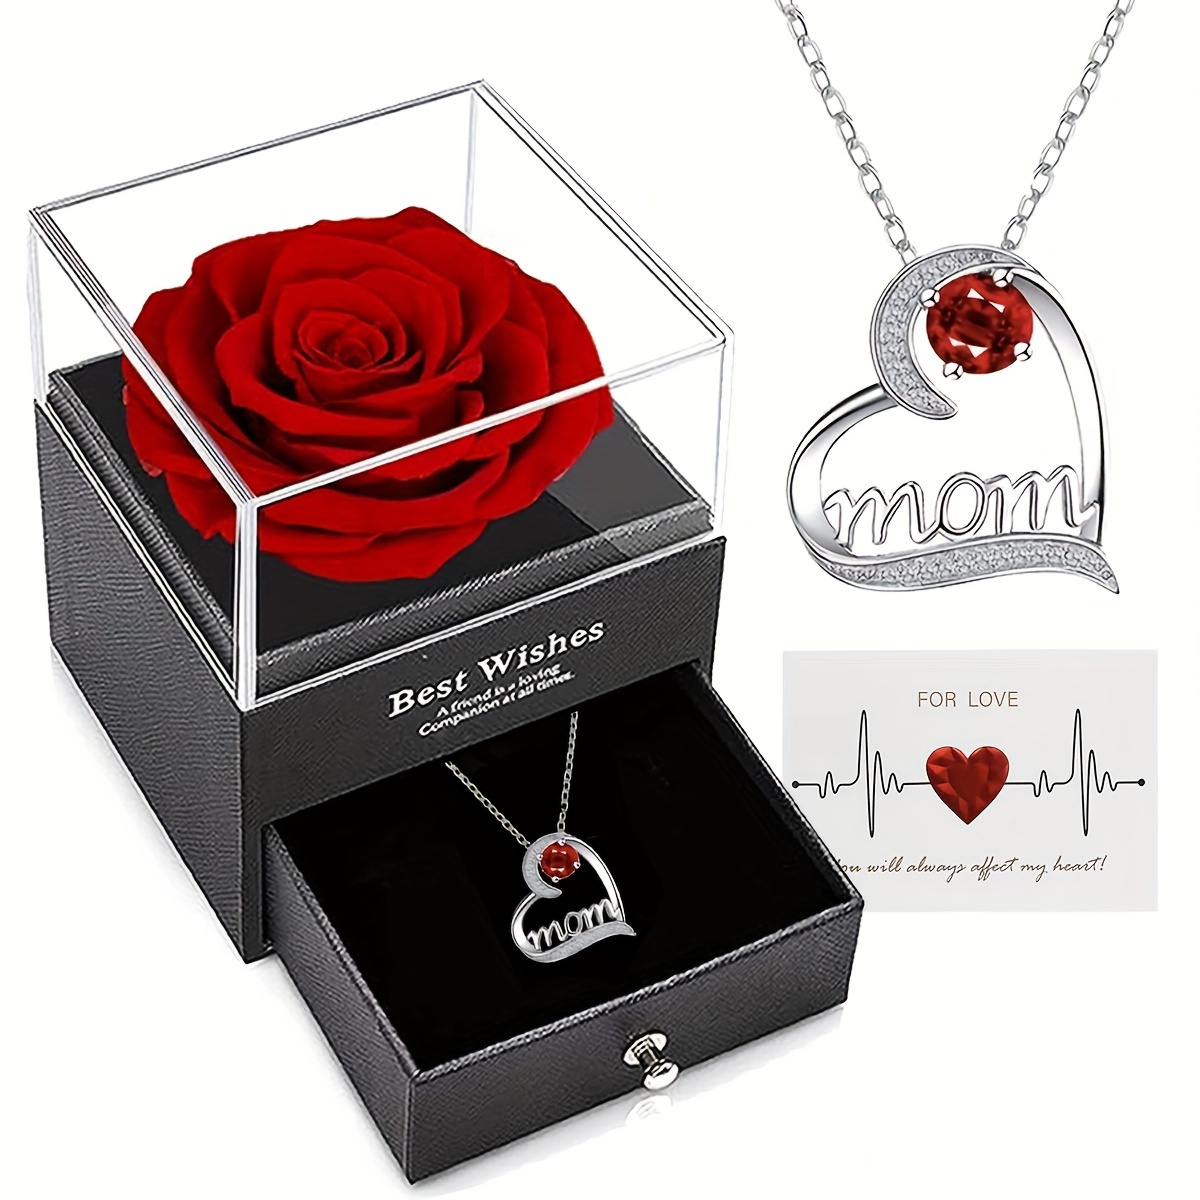 

Elegant Ladies' Rose Soap Flower In Gift Box With Heart-shaped 'mom' Pendant Necklace, Includes Greeting Card, Perfect Present From Daughter For Party Style Occasion Mother's Day Gift Set